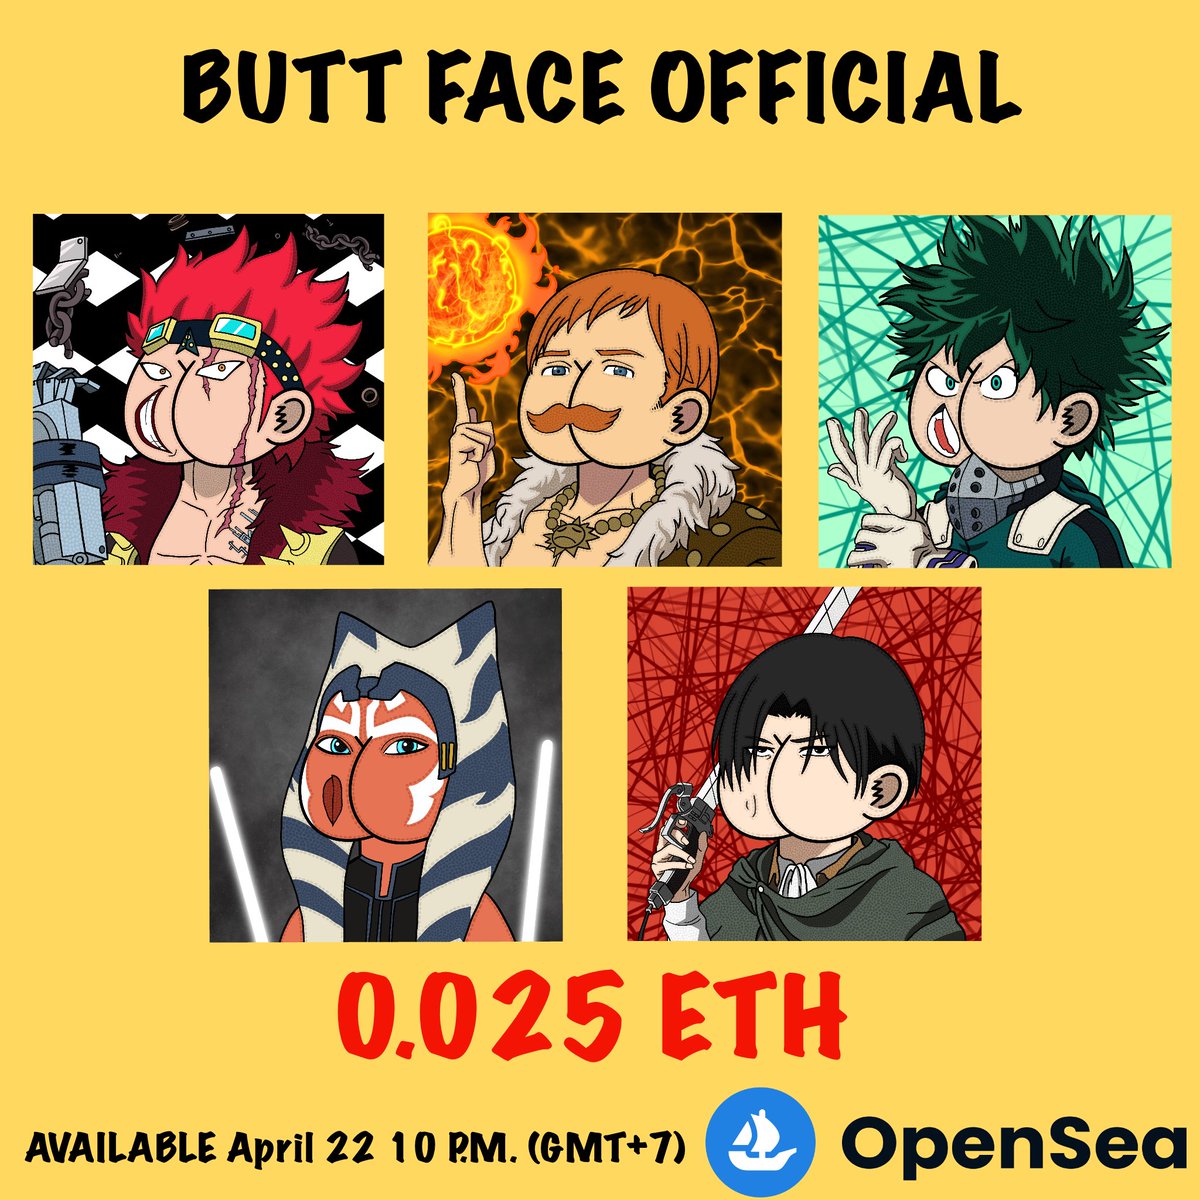 BUTT FACE OFFICIAL

No.26-30

PRICE : 0.025 ETH

opensea.io/collection/but……

#opensea #OpenSeaMarket #OpenSeaCollection #OpenseaNFTs #openseamarketplace #OpenseaArt 
#pfpNFT #NFTTHAILAND #NFTJapan #ButtFaceOfficial #NFTCollection #nftcollector